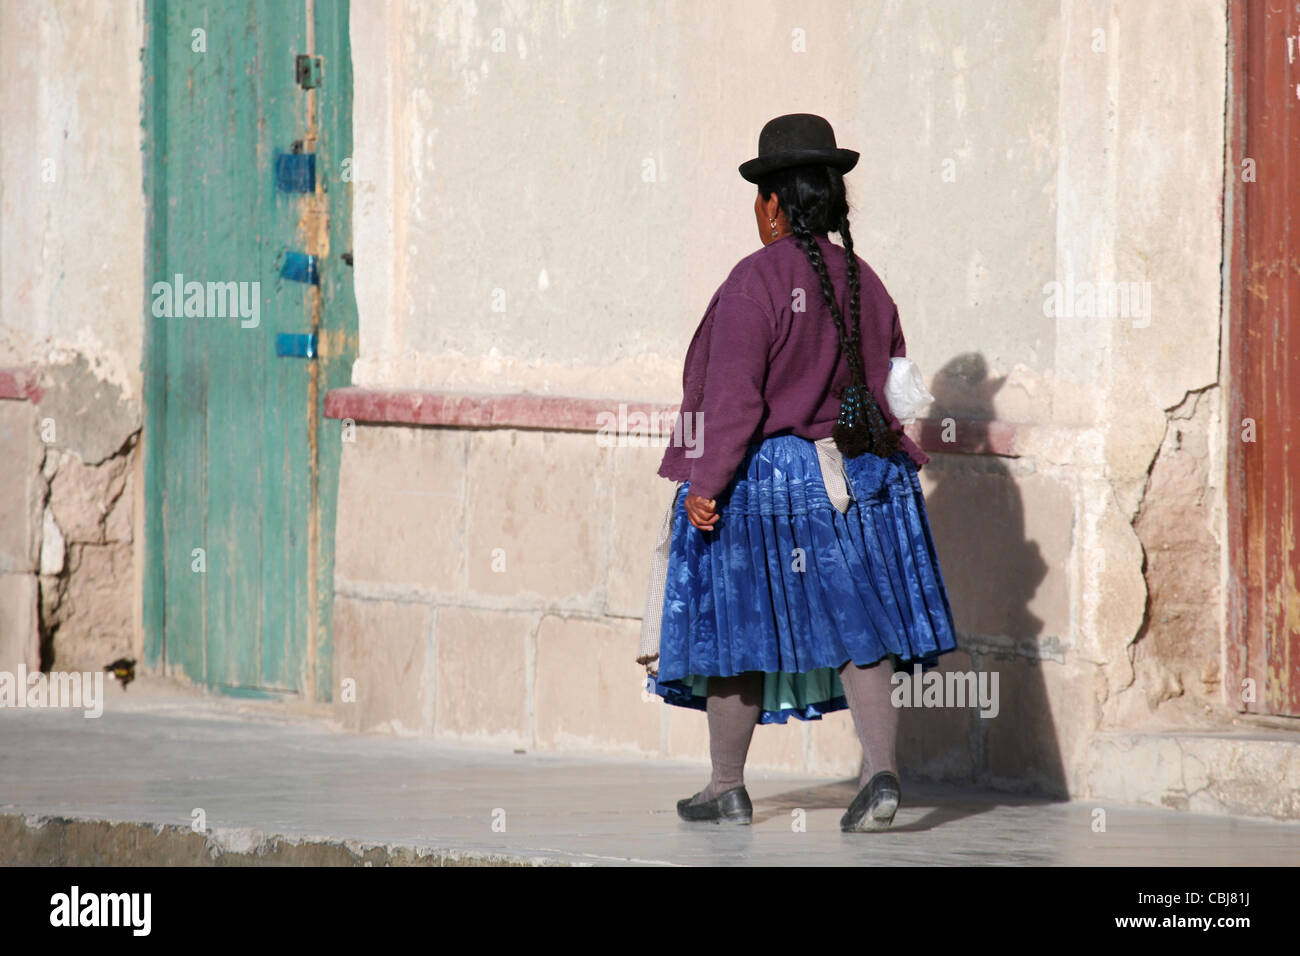 Native indigenous Bolivian woman with braids in traditional dress wearing bowler hat and skirt at Uyuni, Altiplano, Bolivia Stock Photo